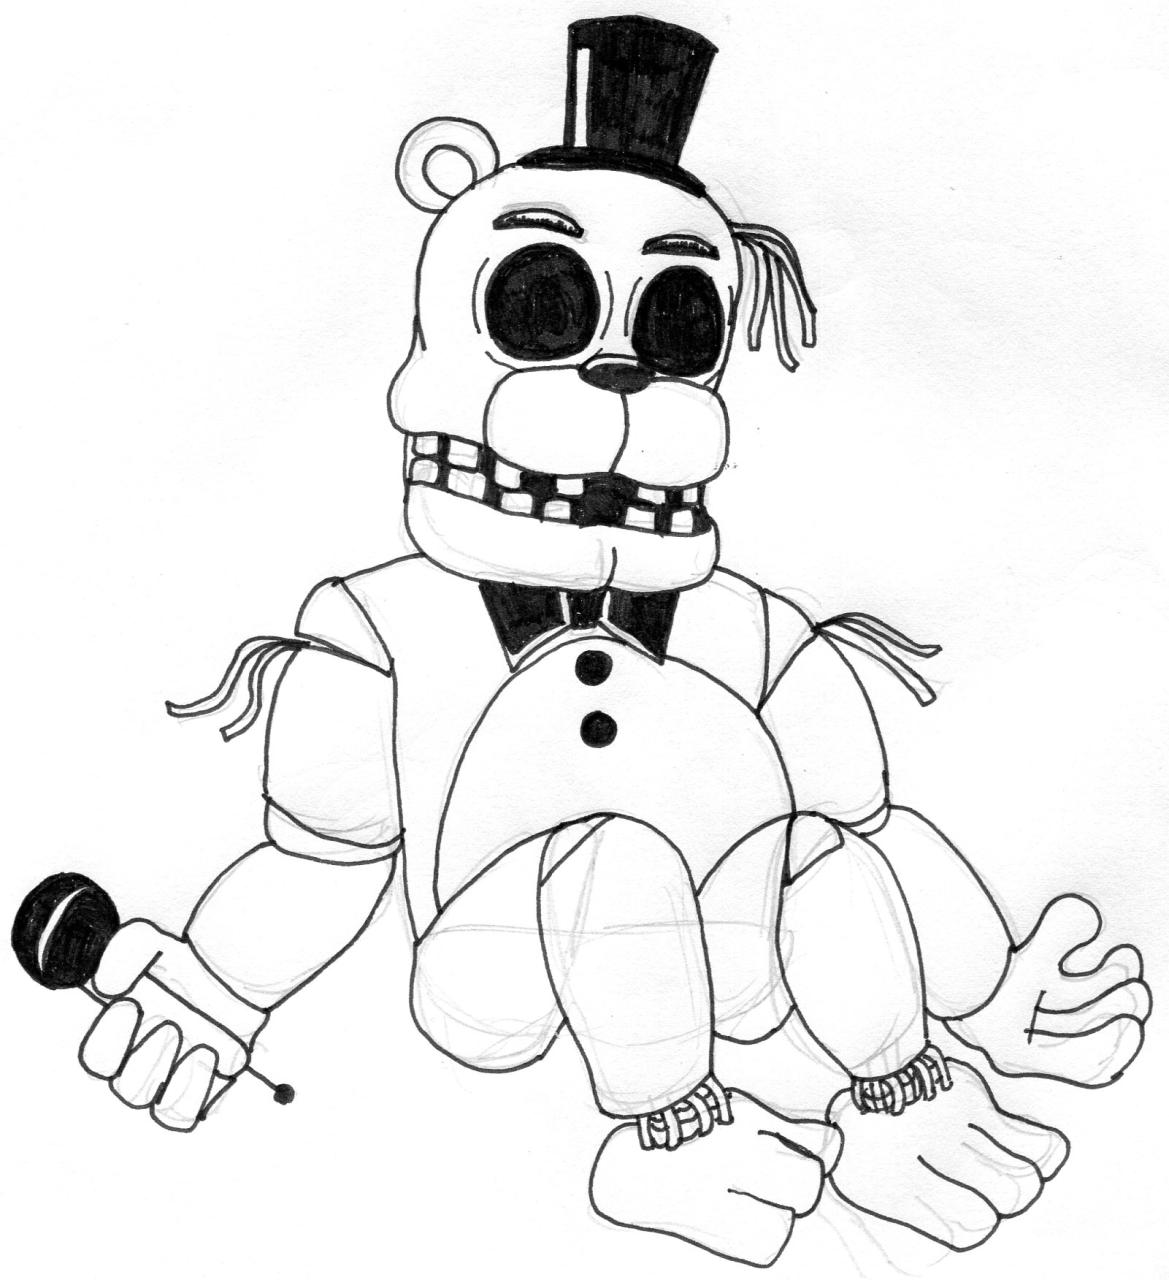 Five Nights At Freddy's Coloring Pages Coloring Home